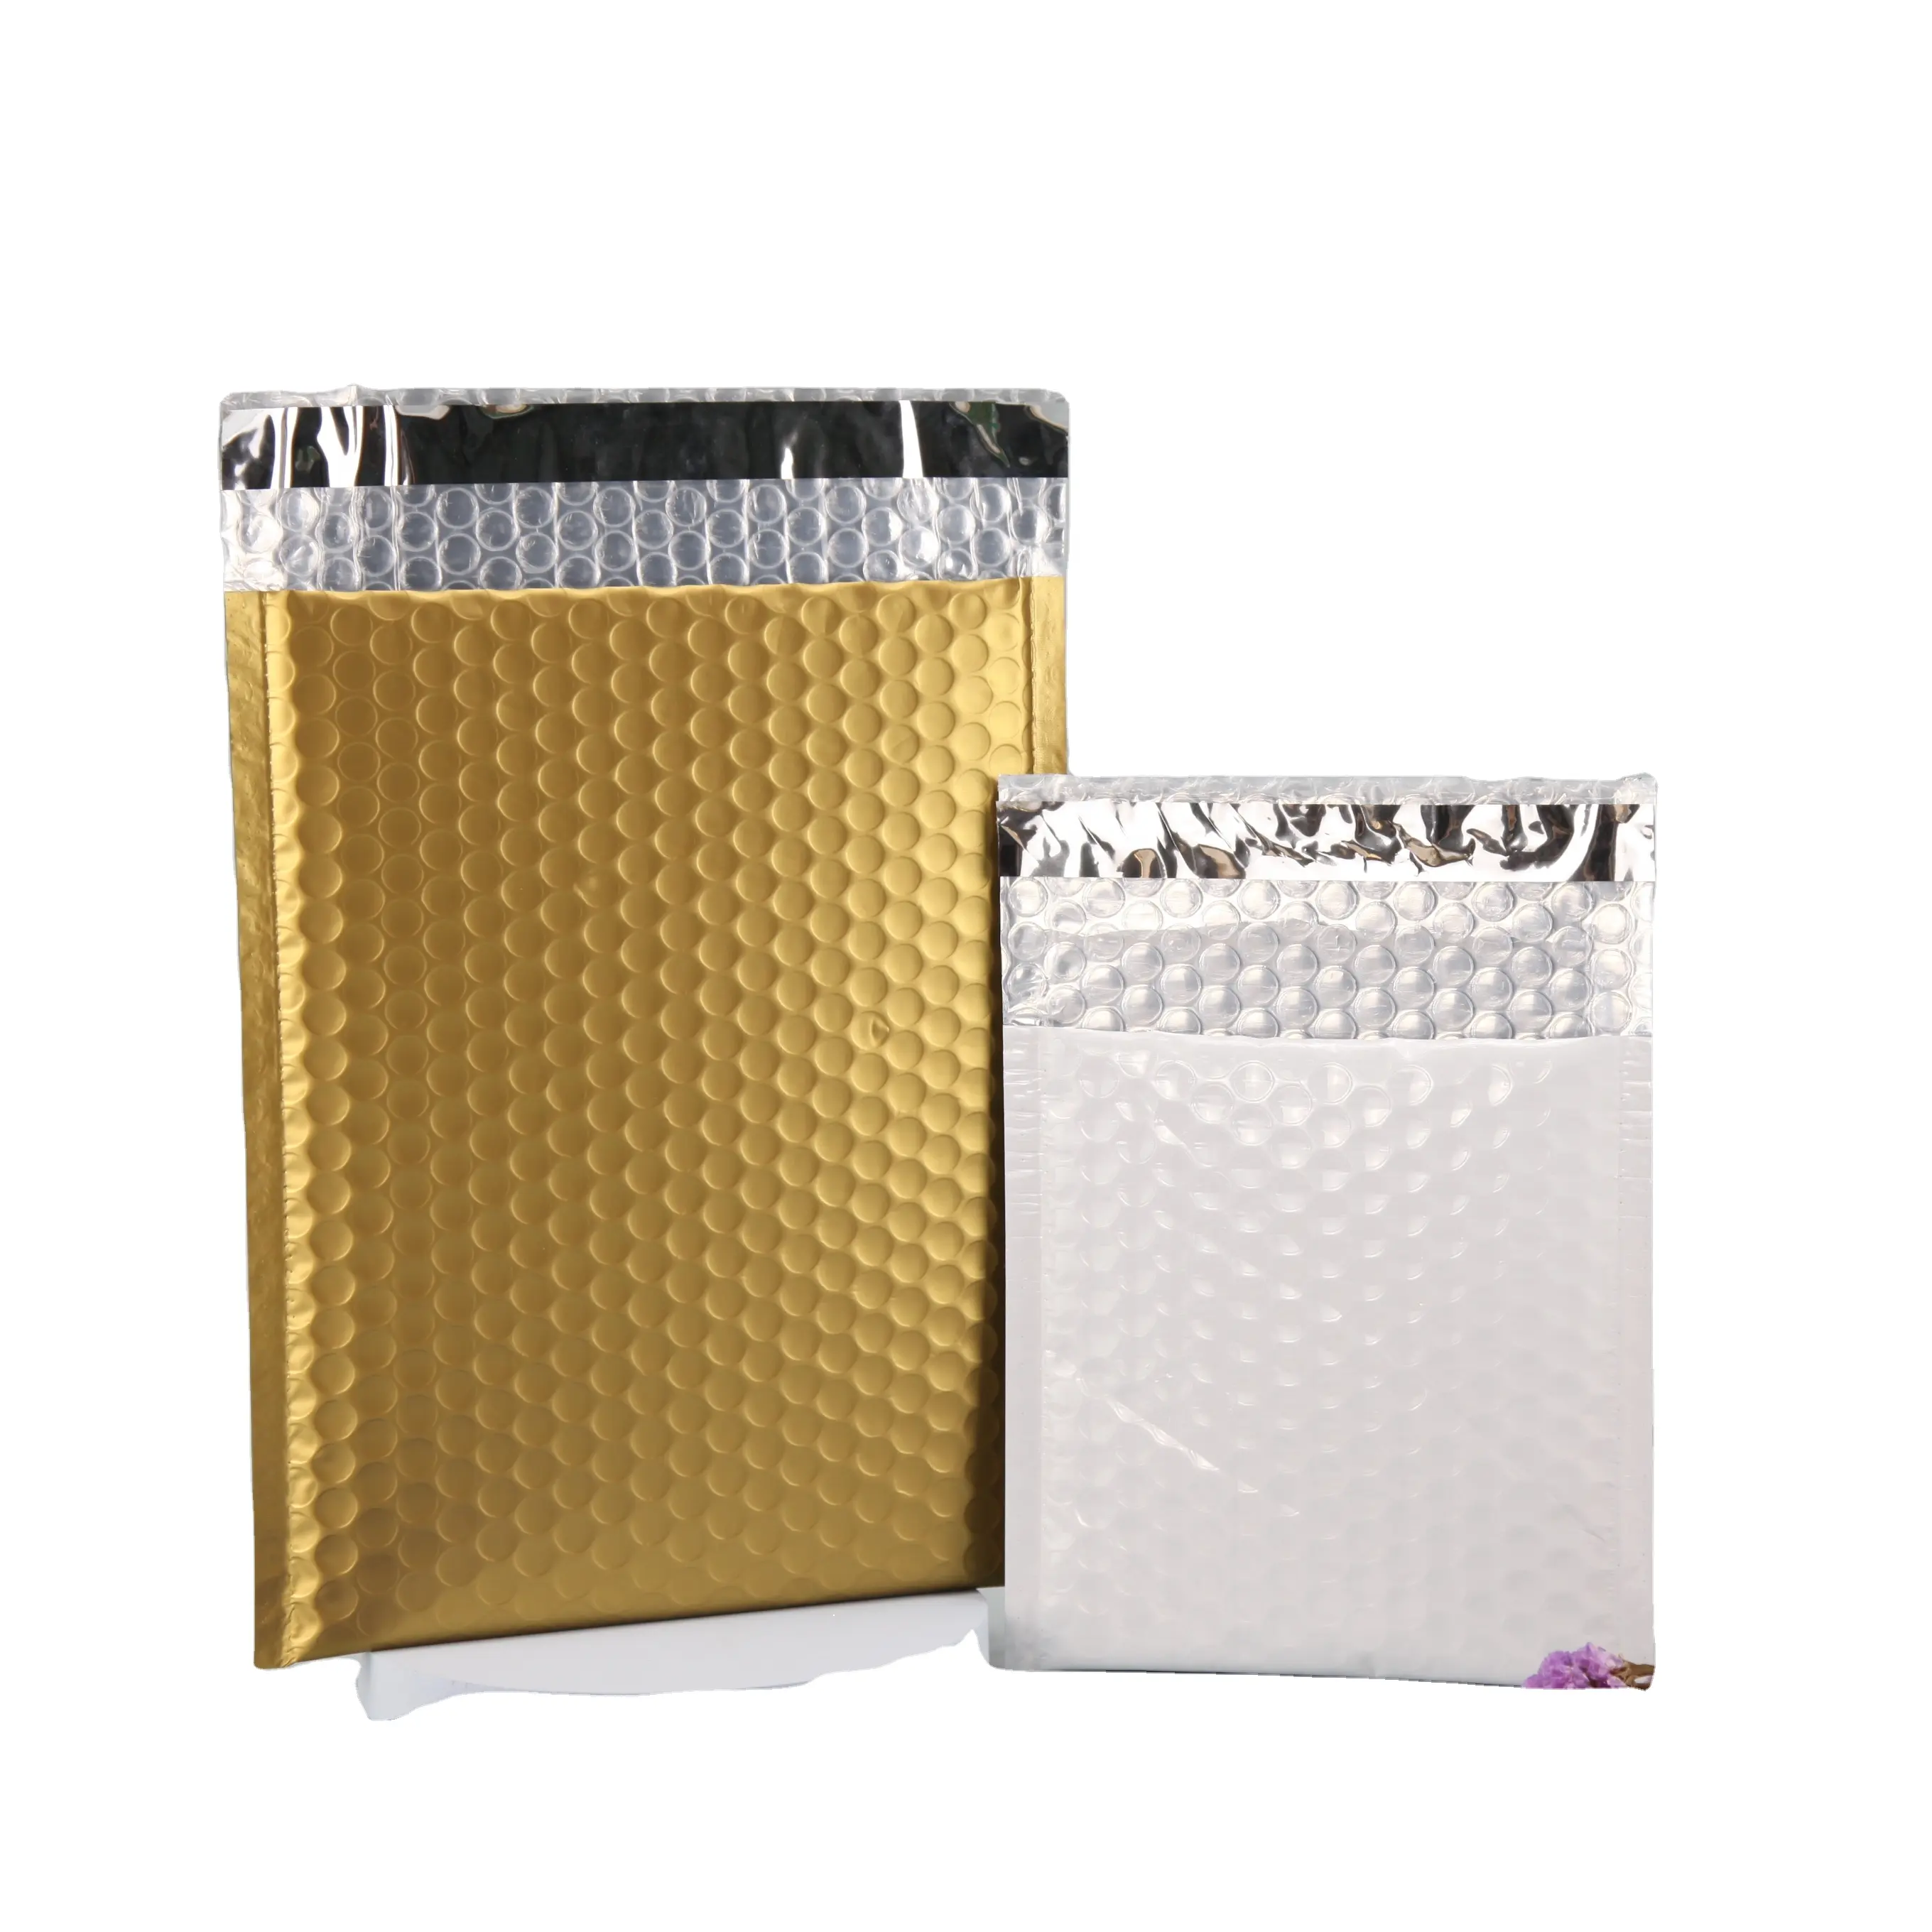 Customized logo printed metallic padded wrap packaging Plastic Envelopes Mailing bag poly envelopes glamour bubble mailers